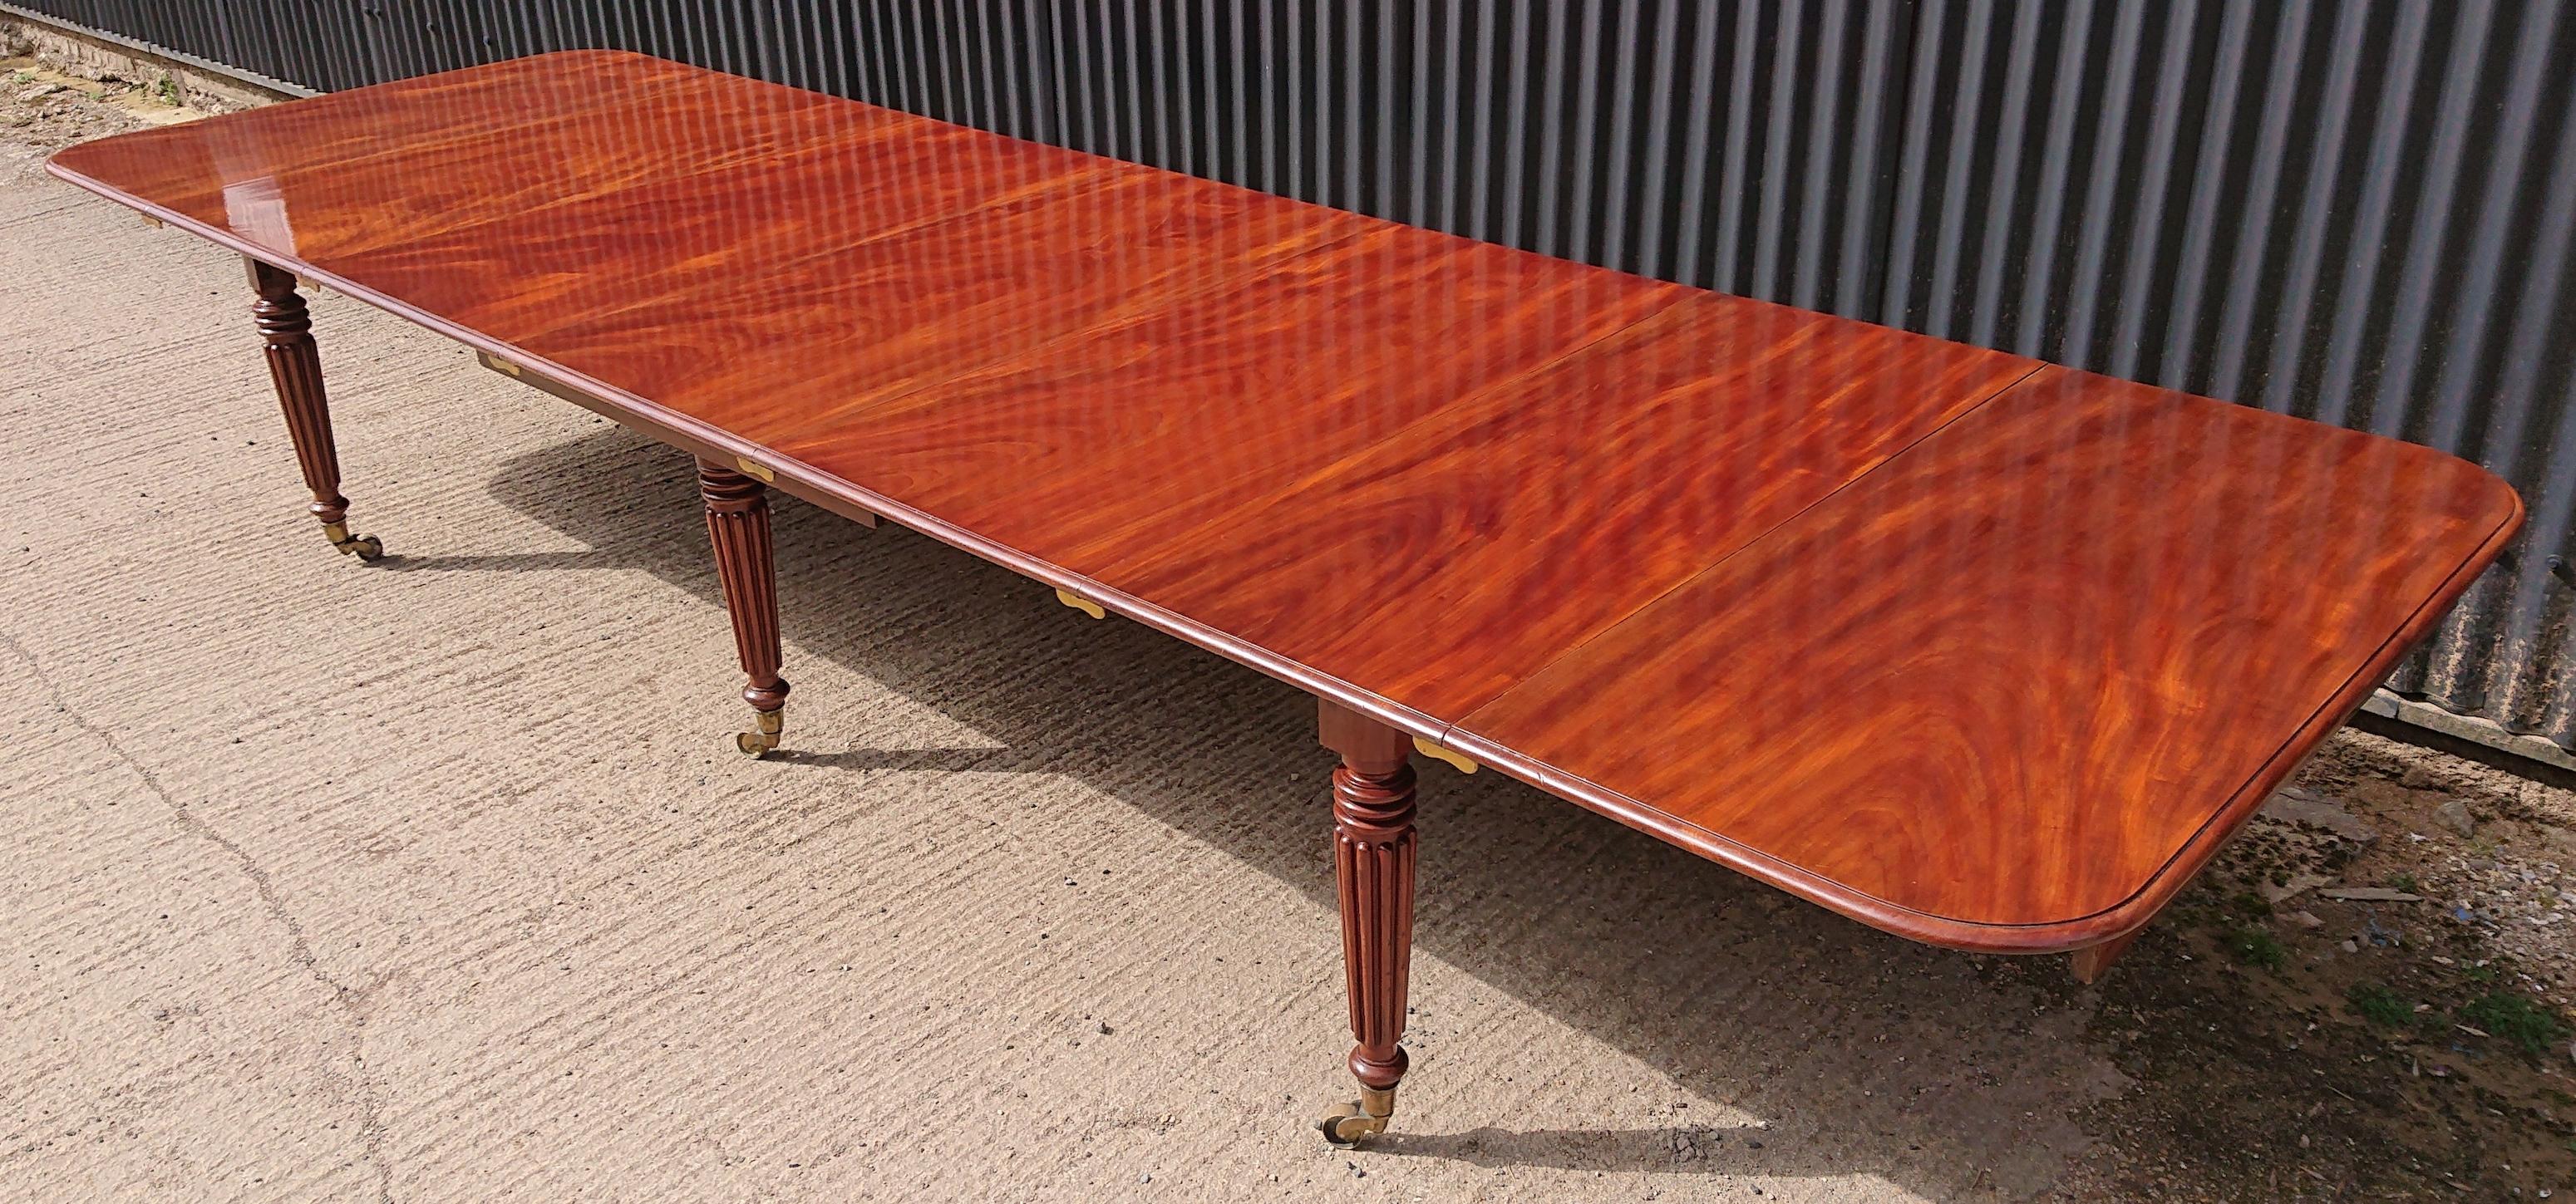 Early 19th Century Regency Mahogany Extending Dining Table Attributed to Gillows For Sale 4